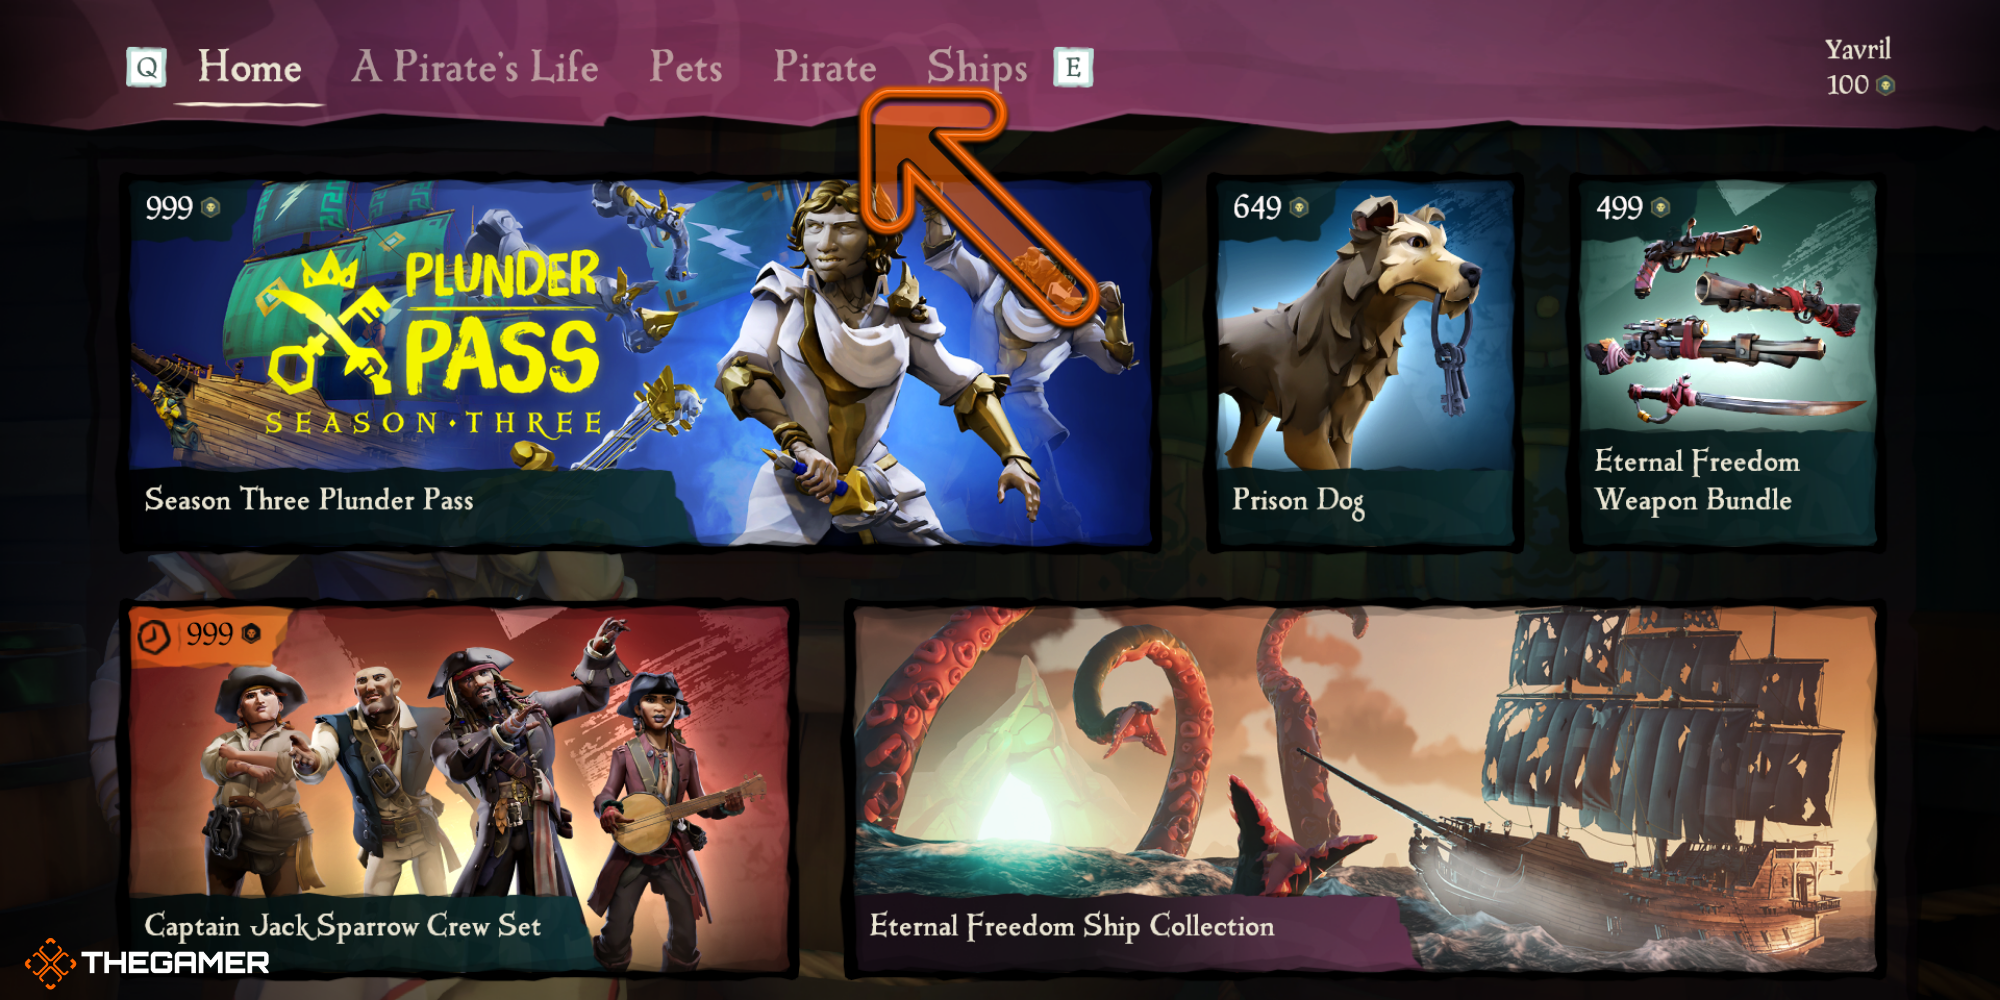 Sea of Thieves - Pirate Emporium with arrow directing the viewer to the Pirate tab